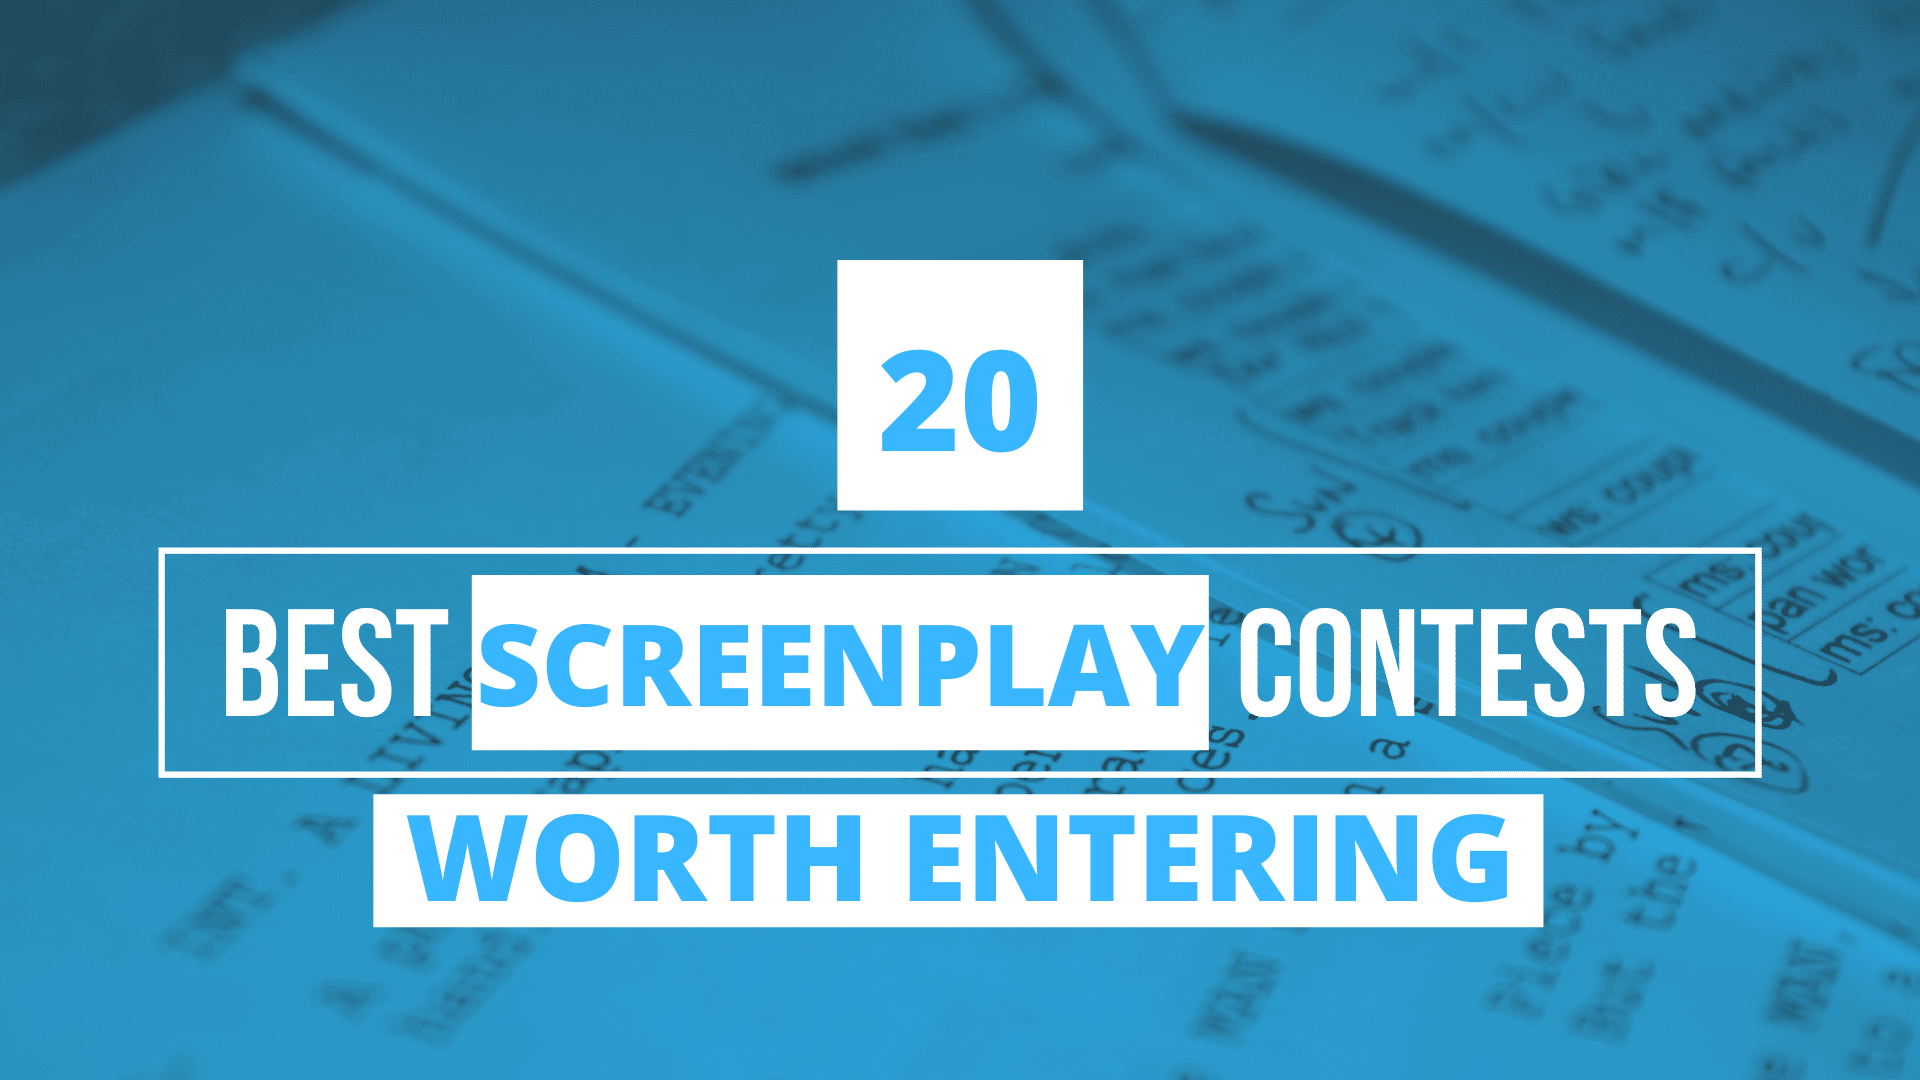 6 Best Screenwriting Contests to Supercharge Your Career in 2022